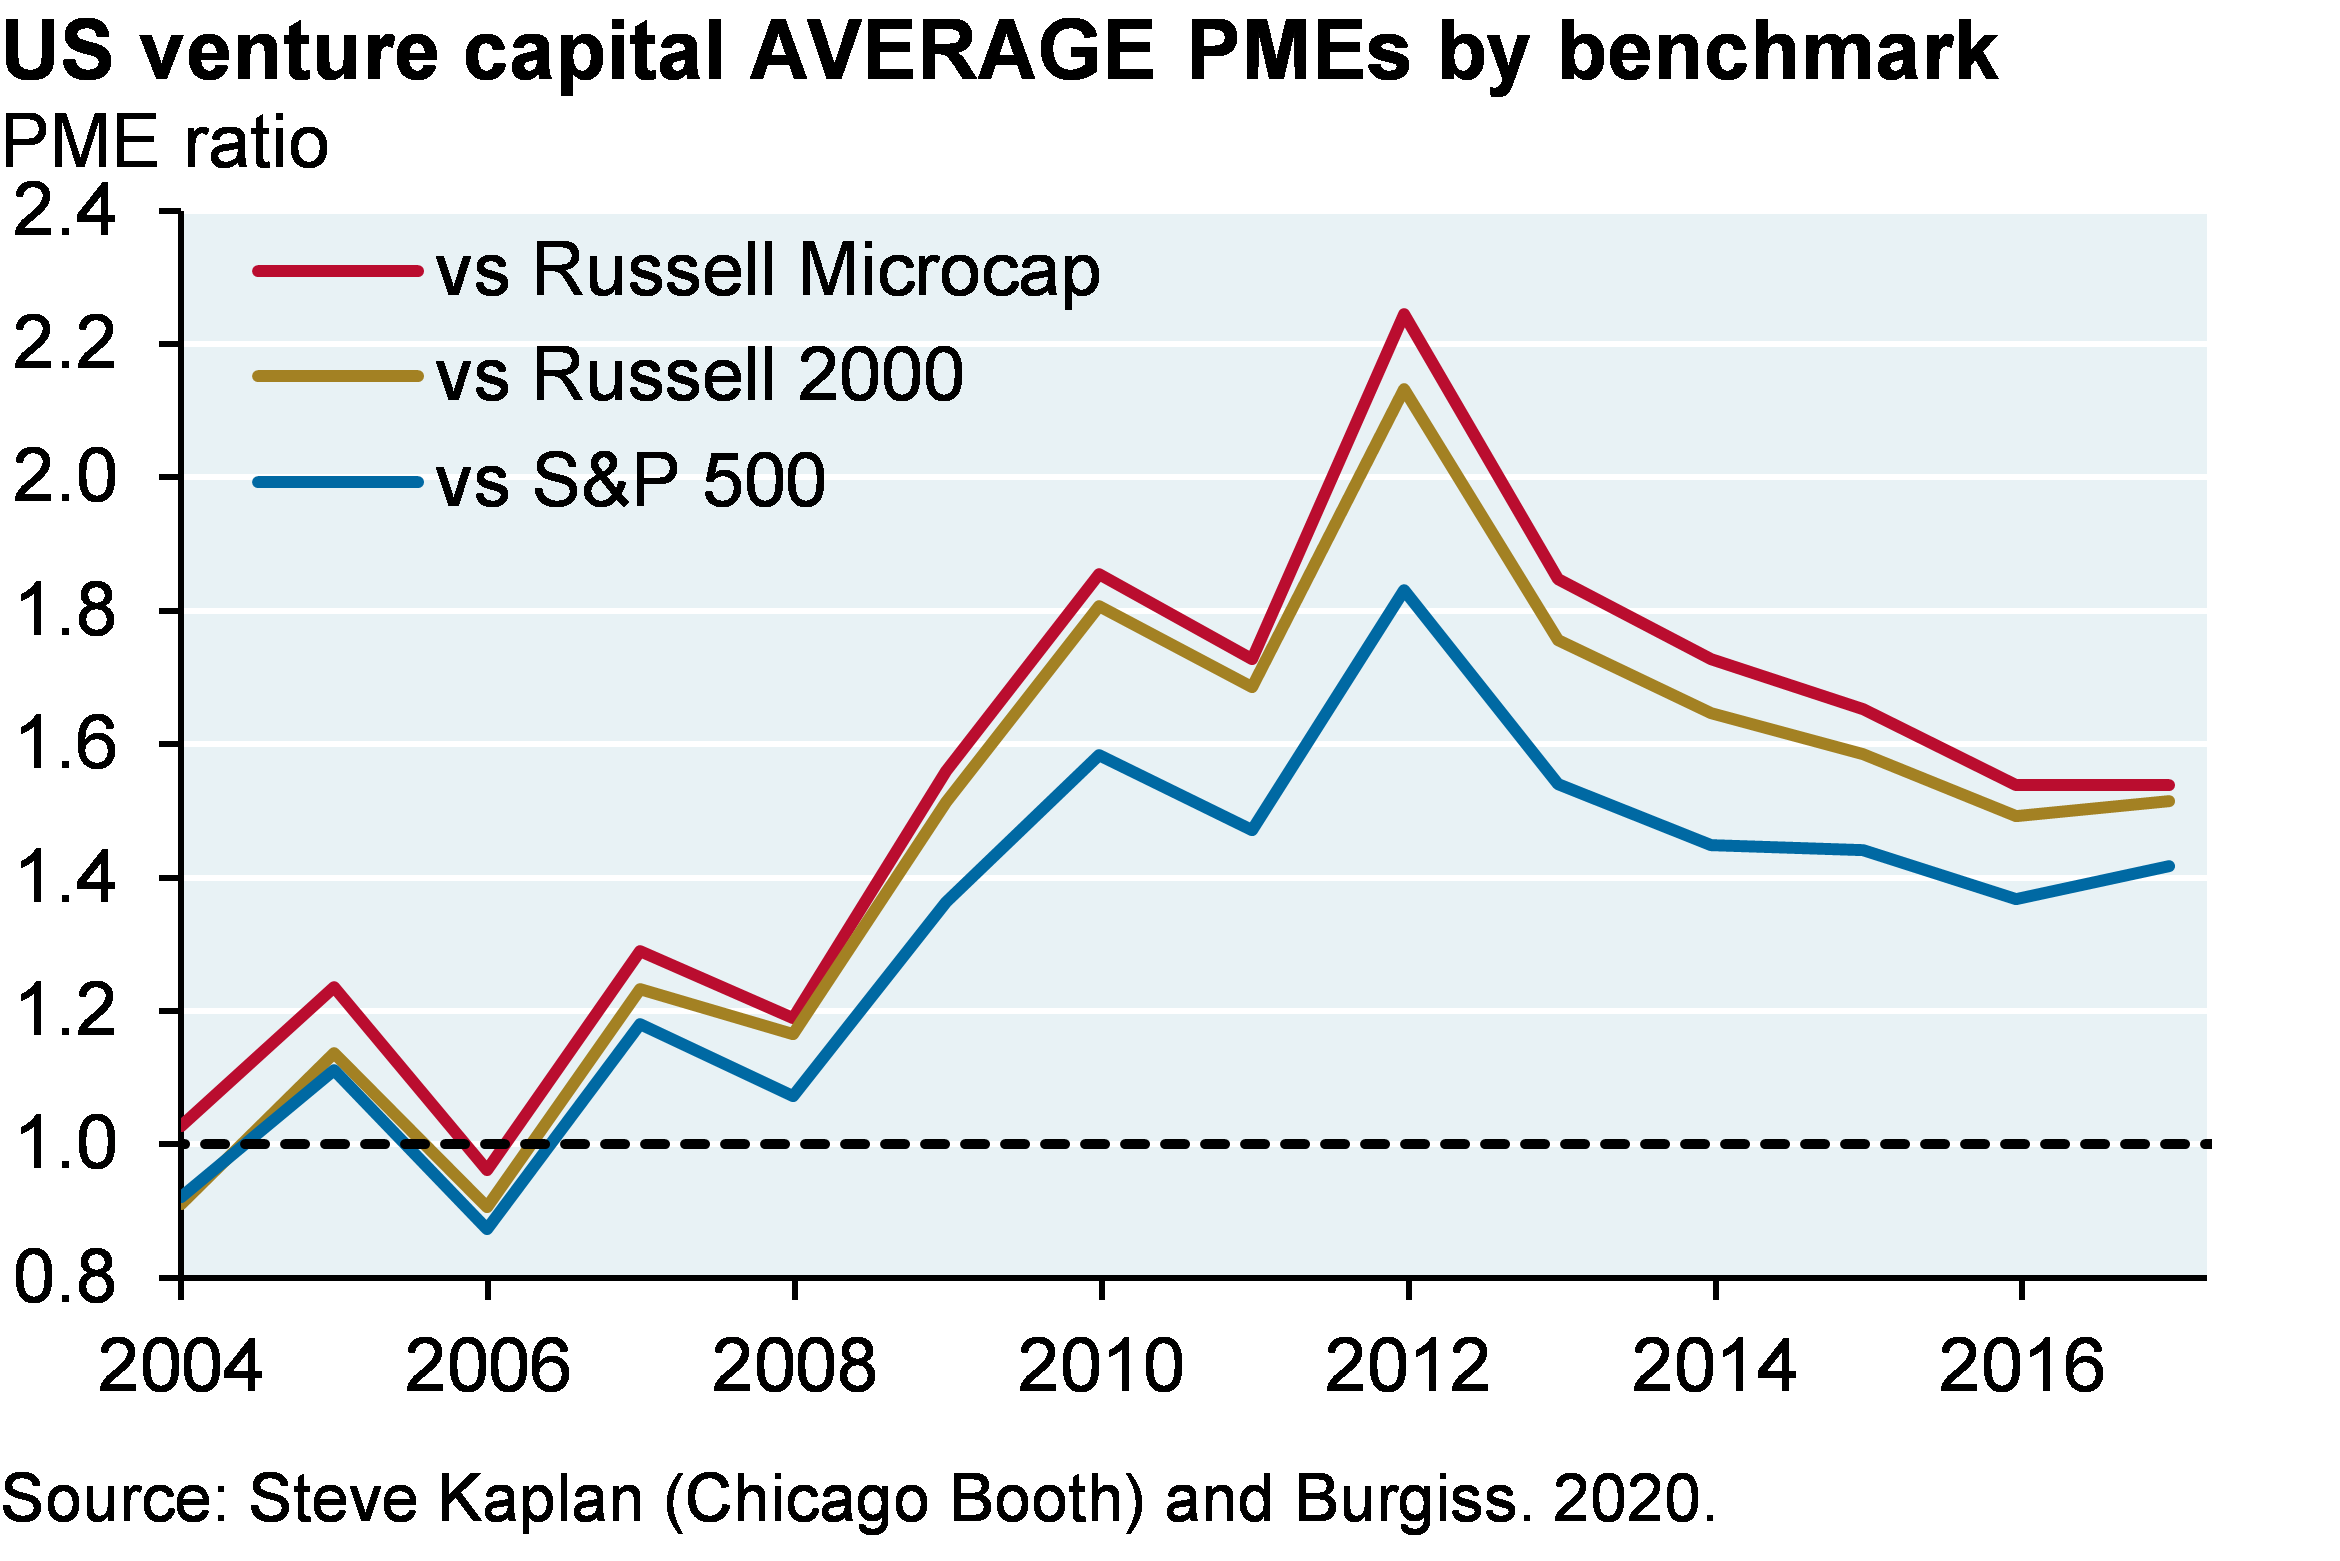 Line chart which shows US venture capital average PMEs, showing the PME vs the Russell Microcap, the Russell 2000, and the S&P 500. A PME above 1 indicates that the venture capital performance outperformed the benchmark. Since 2004, the PME ratios for all benchmarks steadily increased from around 1 to around 2.2 in 2012. Since then the PME ratios have declined to around 1.6. Over time, the PME vs Russell Microcap has been slightly higher than the PME vs Russell 2000. There has been a wider gap between the PME vs Russell 2000 and the PME vs S&P 500. In 2012, the PME vs S&P 500 was 1.8 compared to 2.2 vs the Russsell 2000. In the most recent point, the PME vs the Russell 2000 was around 1.5 compared to 1.4 vs the S&P 500.